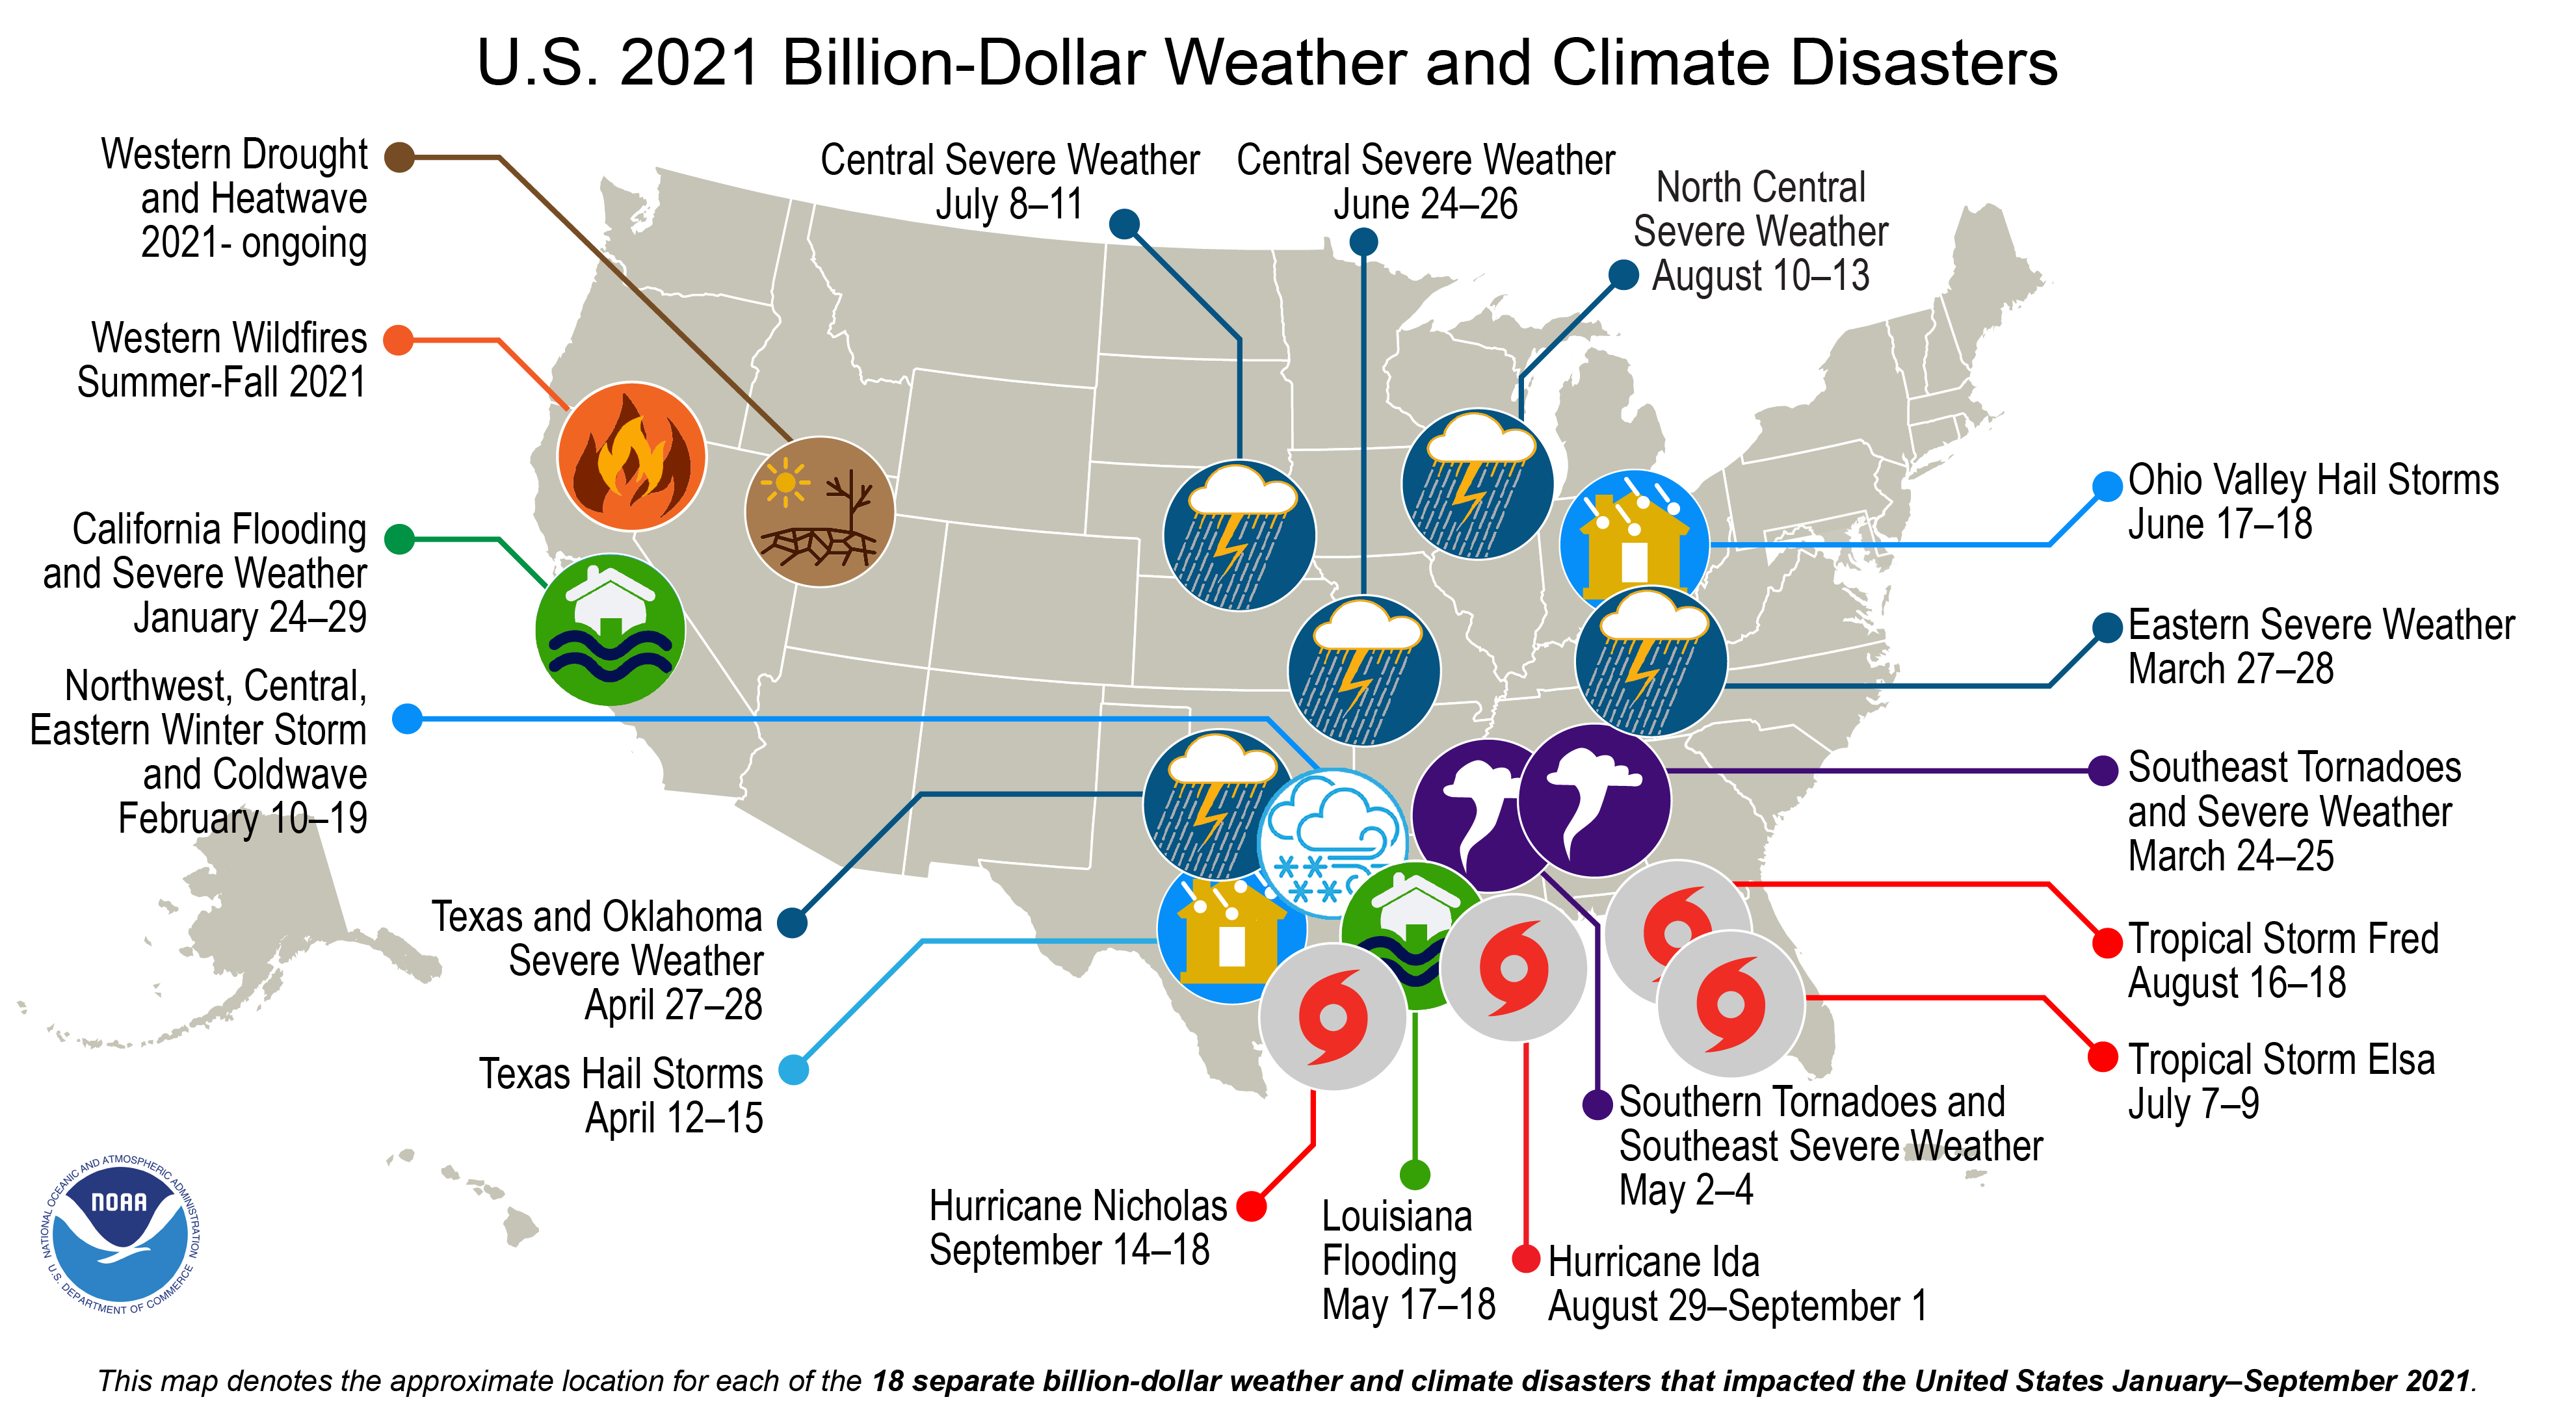 U.S. On Pace for Record Number of BillionDollar Weather Disasters